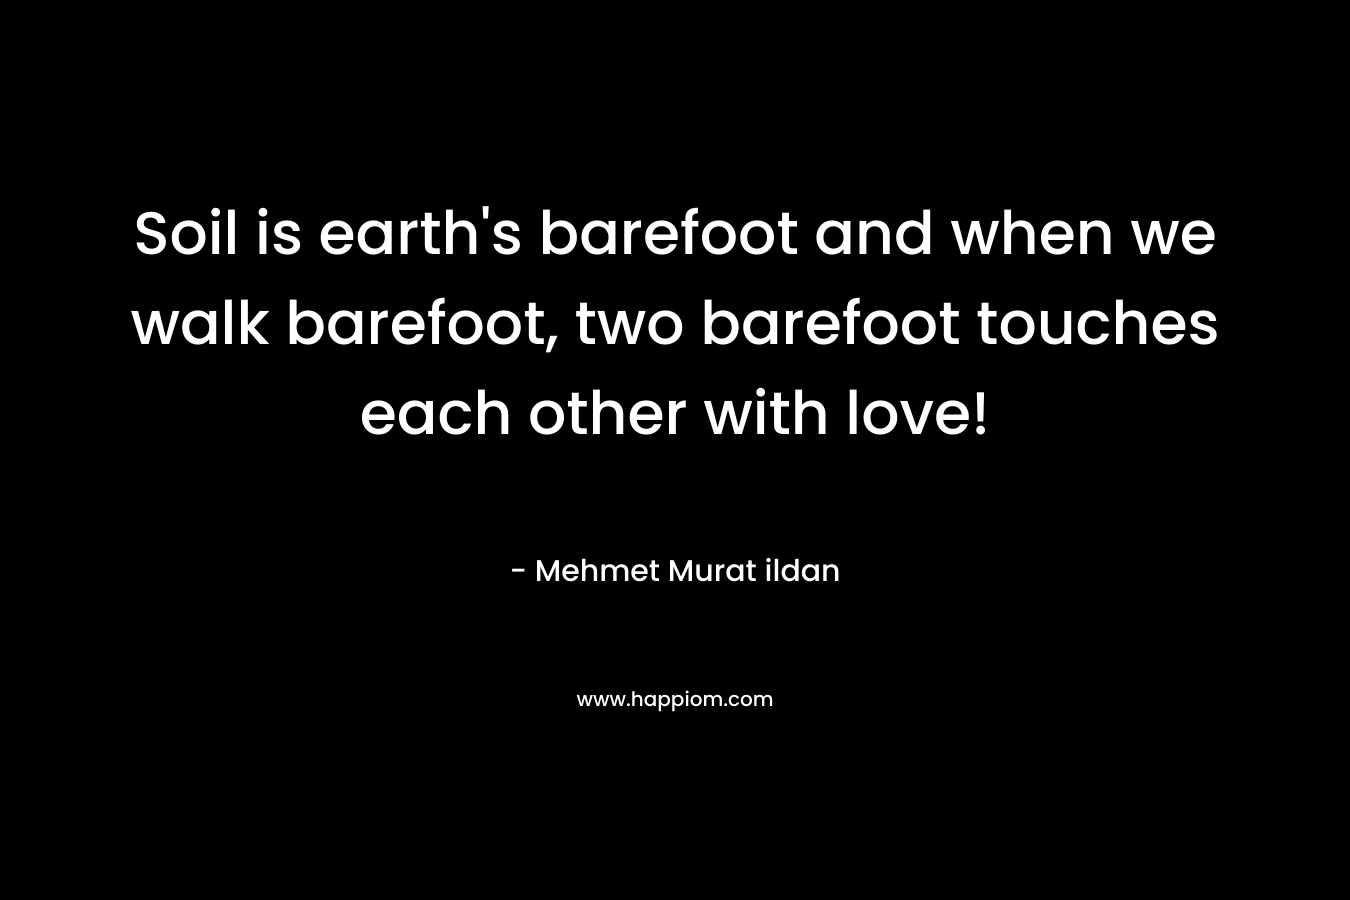 Soil is earth’s barefoot and when we walk barefoot, two barefoot touches each other with love! – Mehmet Murat ildan